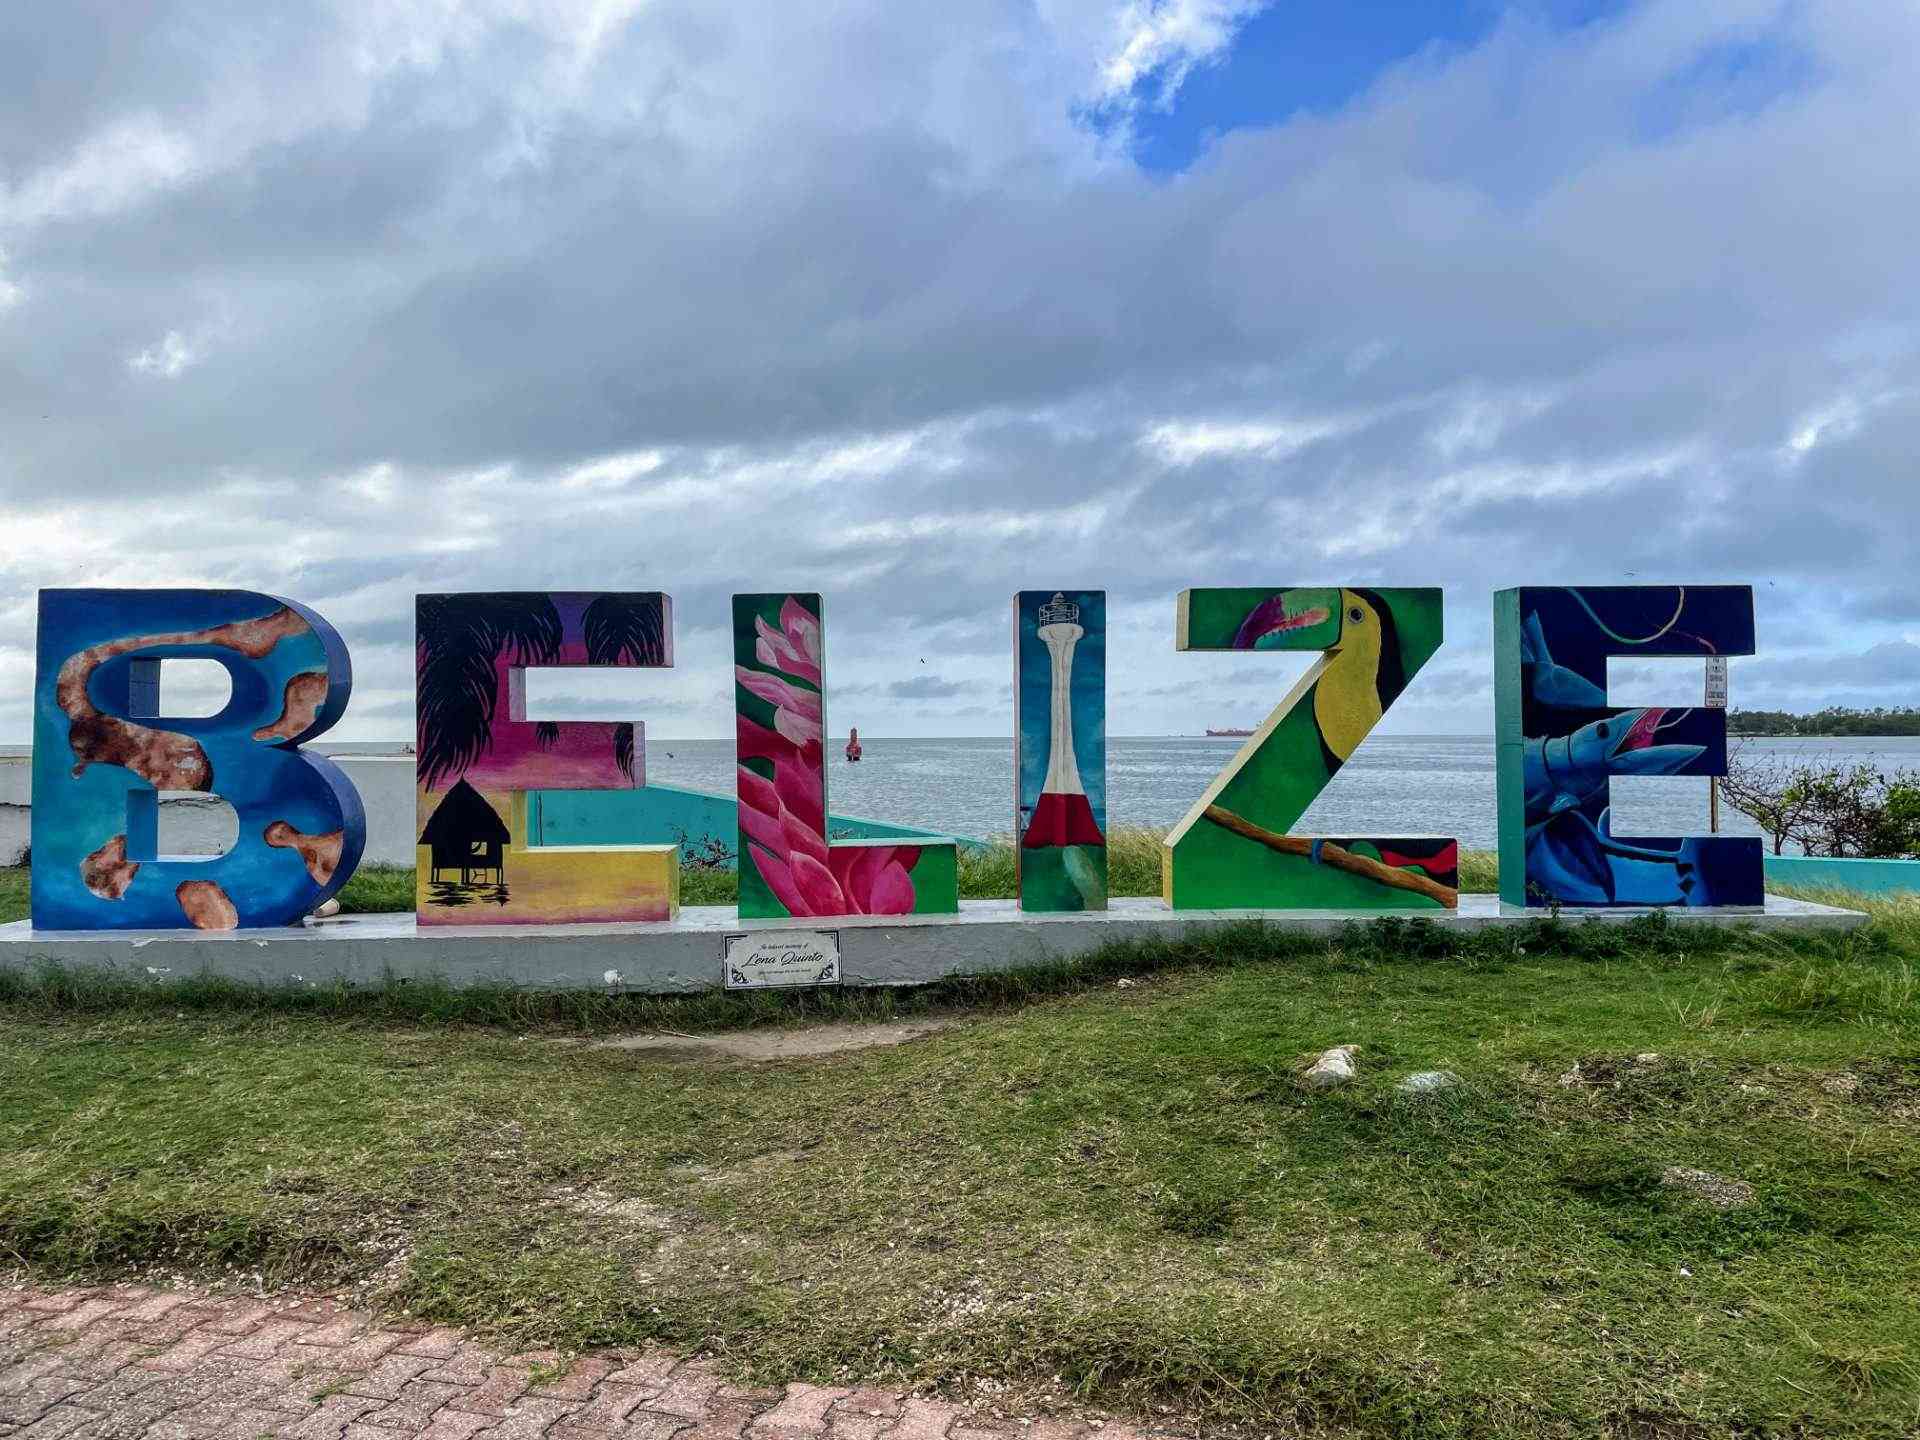 The sign of Belize.